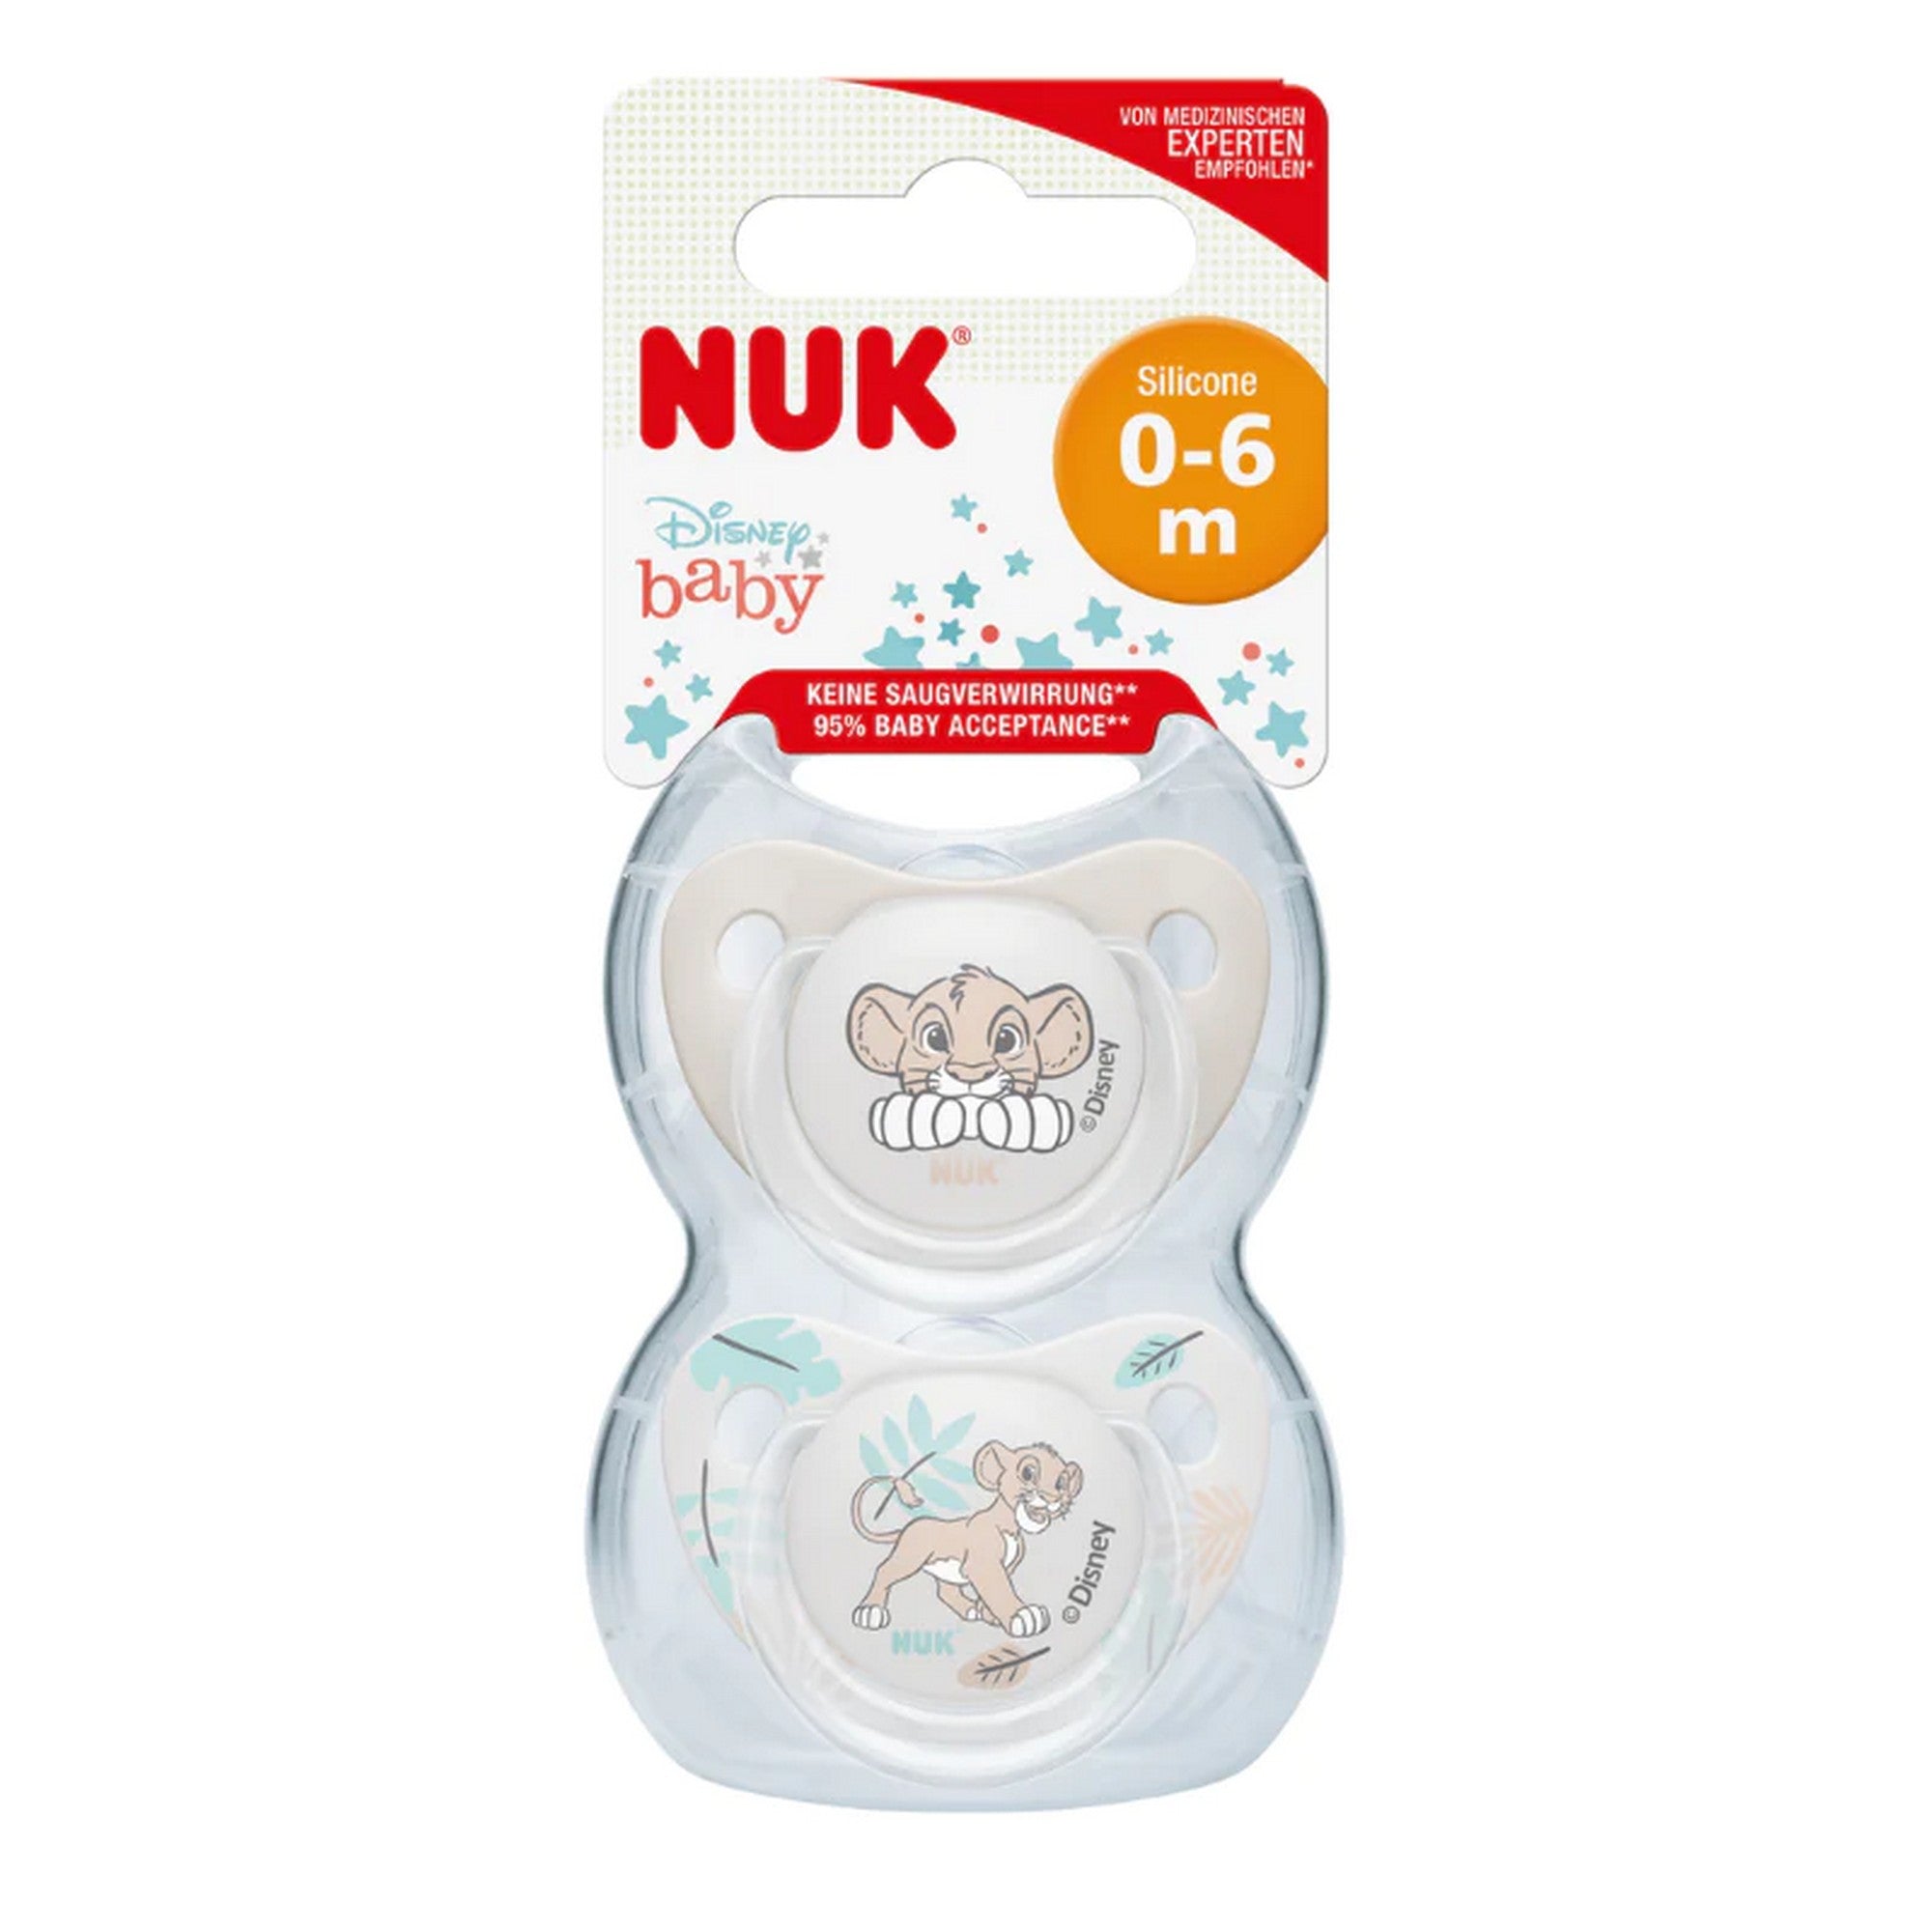 NUK LION KING SIZE 1 SOOTHER 2S